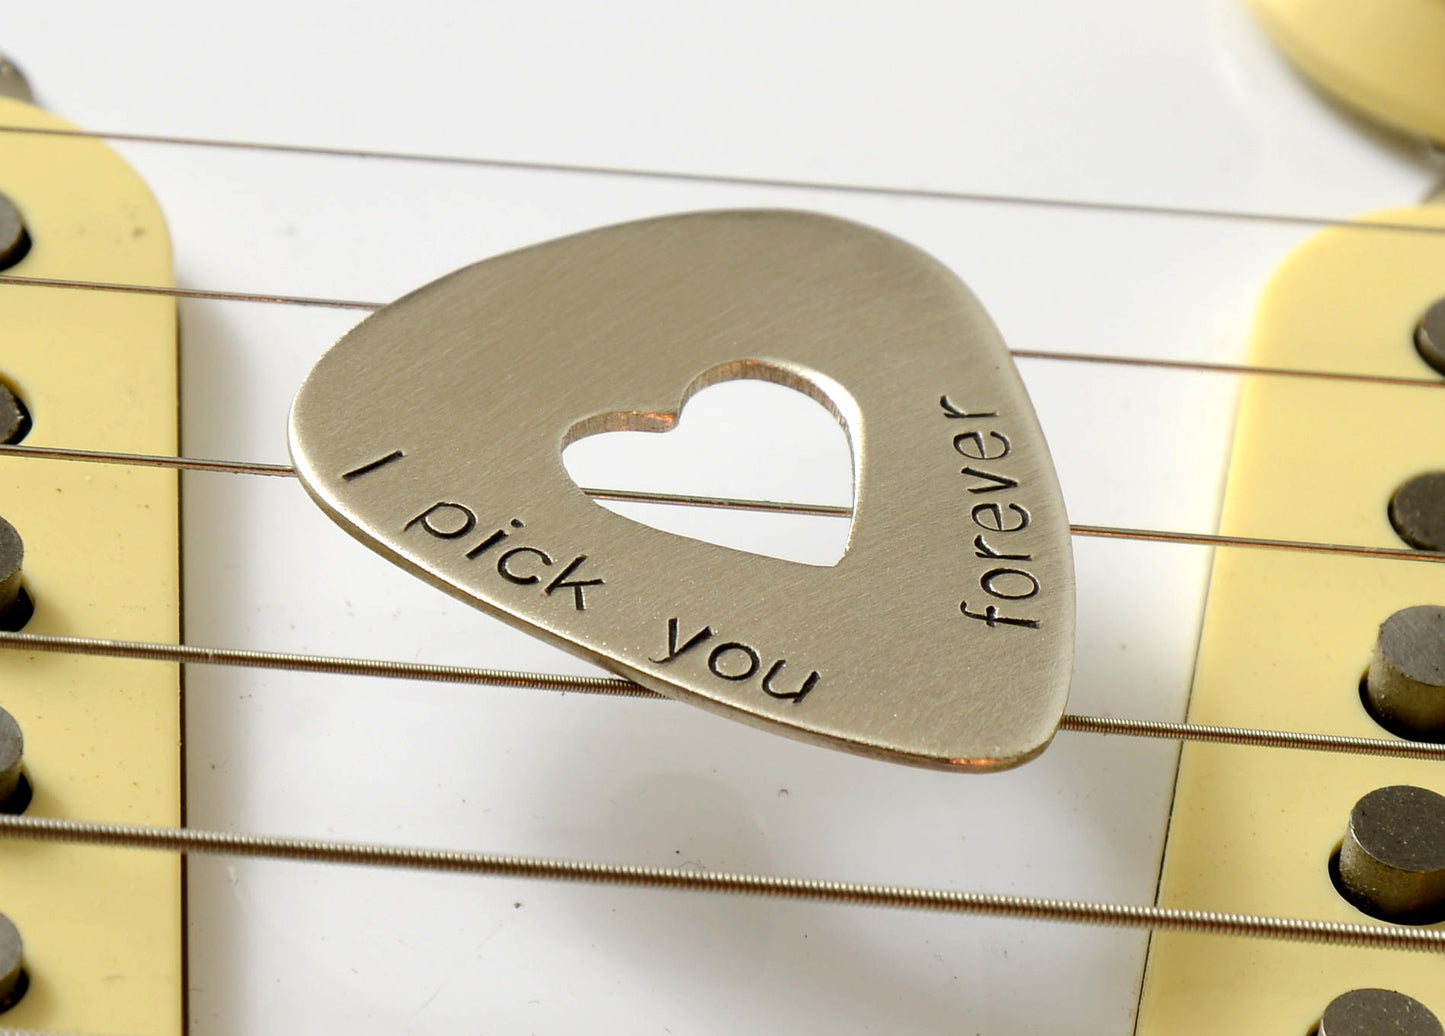 I Pick You Forever Sterling Silver Guitar Pick with Cutout Heart